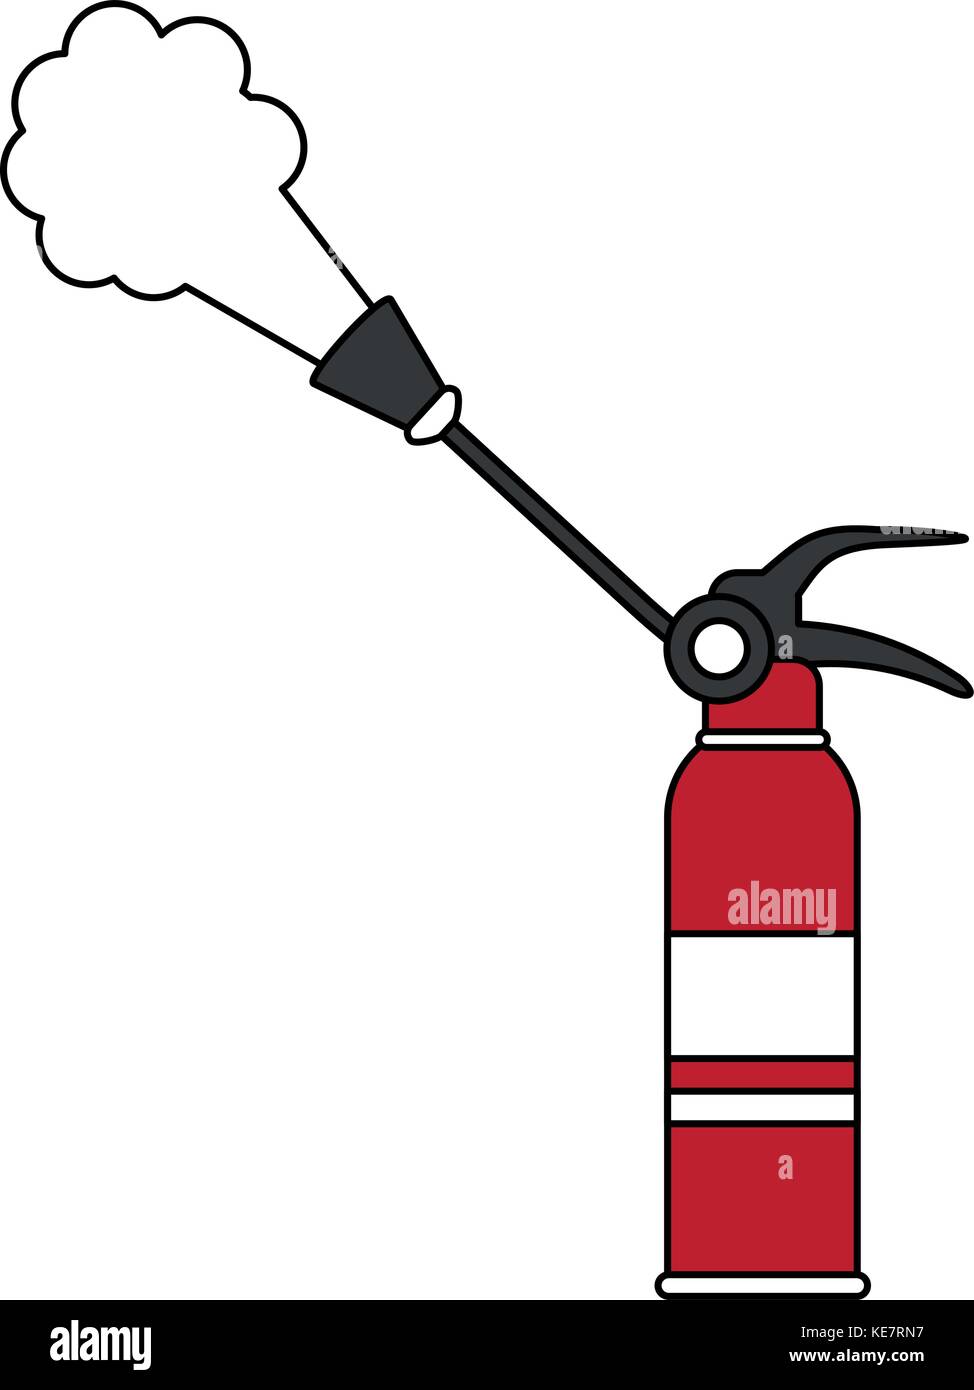 Extinguisher firefigther tool Stock Vector